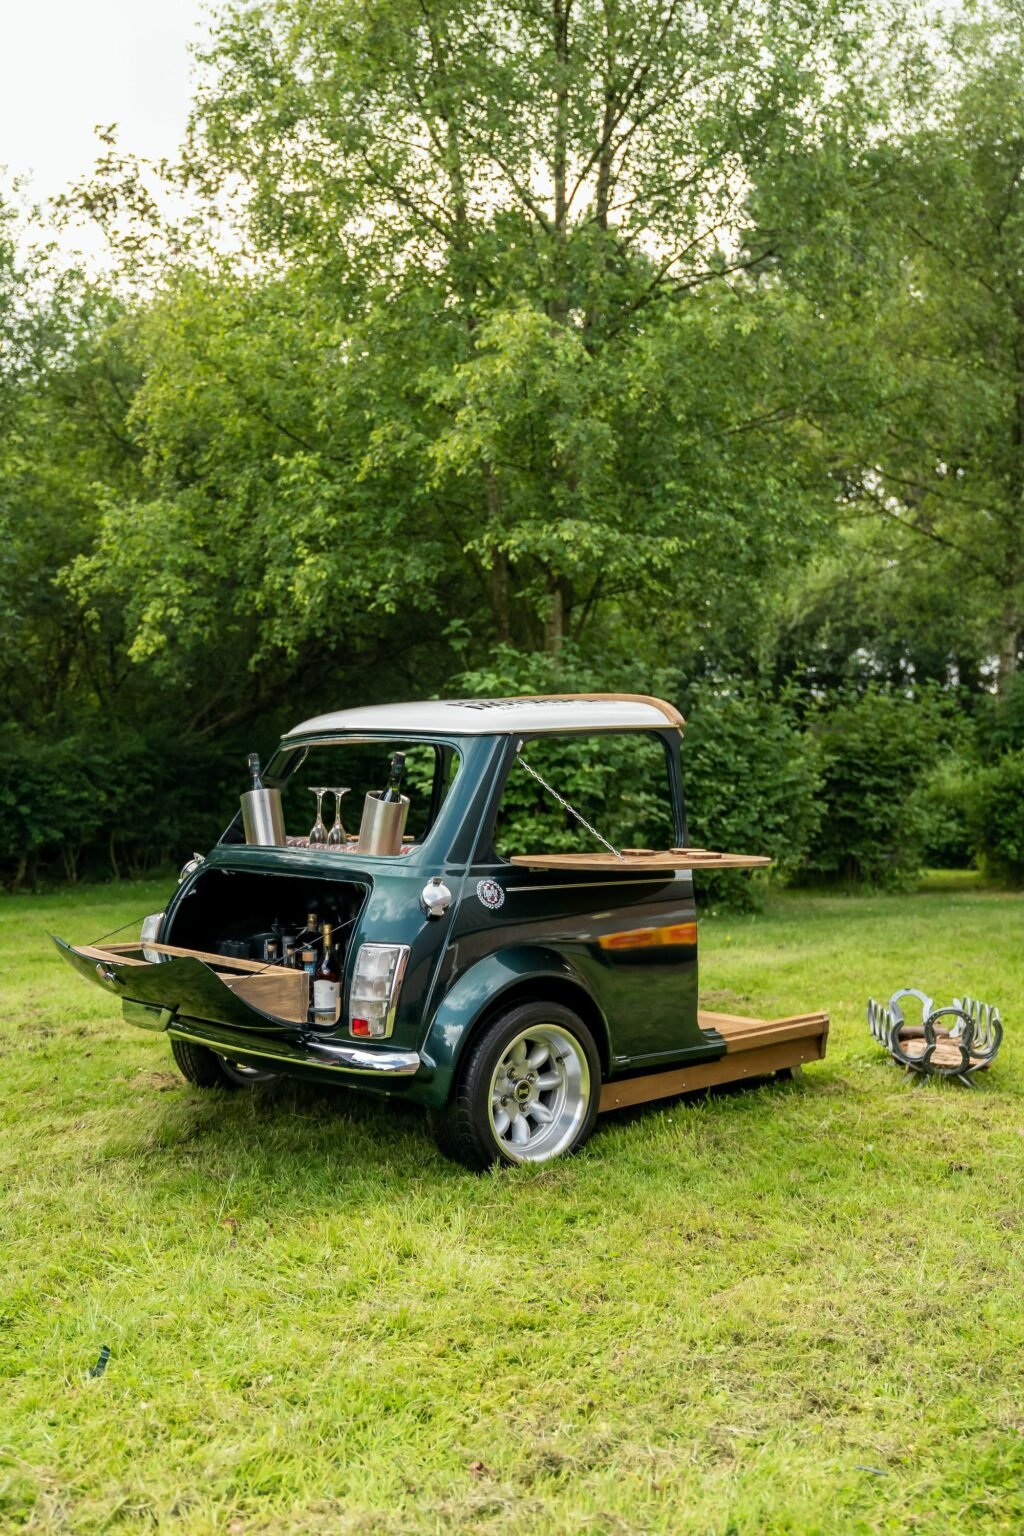 MiniBar Made From A Real Mini Cooper 16 1024x1536 1